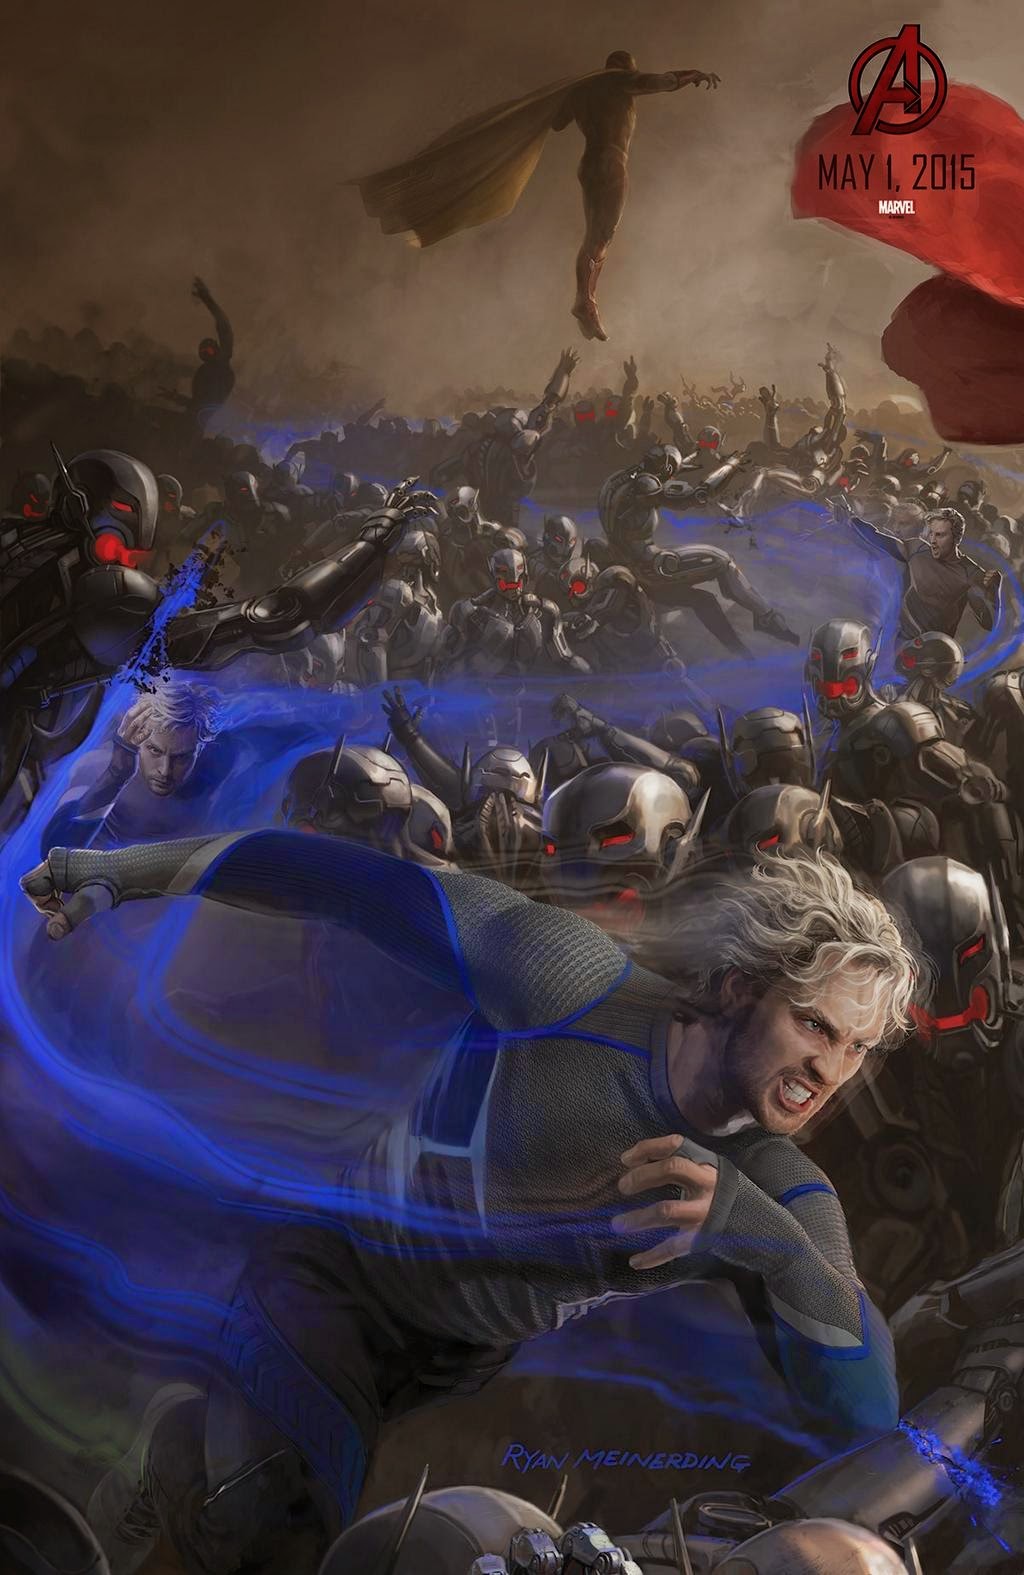 San Diego Comic-Con 2014 Exclusive Avengers Age of Ultron Concept Art Movie Posters by Marvel - Aaron Taylor-Johnson as Quicksilver & Paul Bettany as The Vision